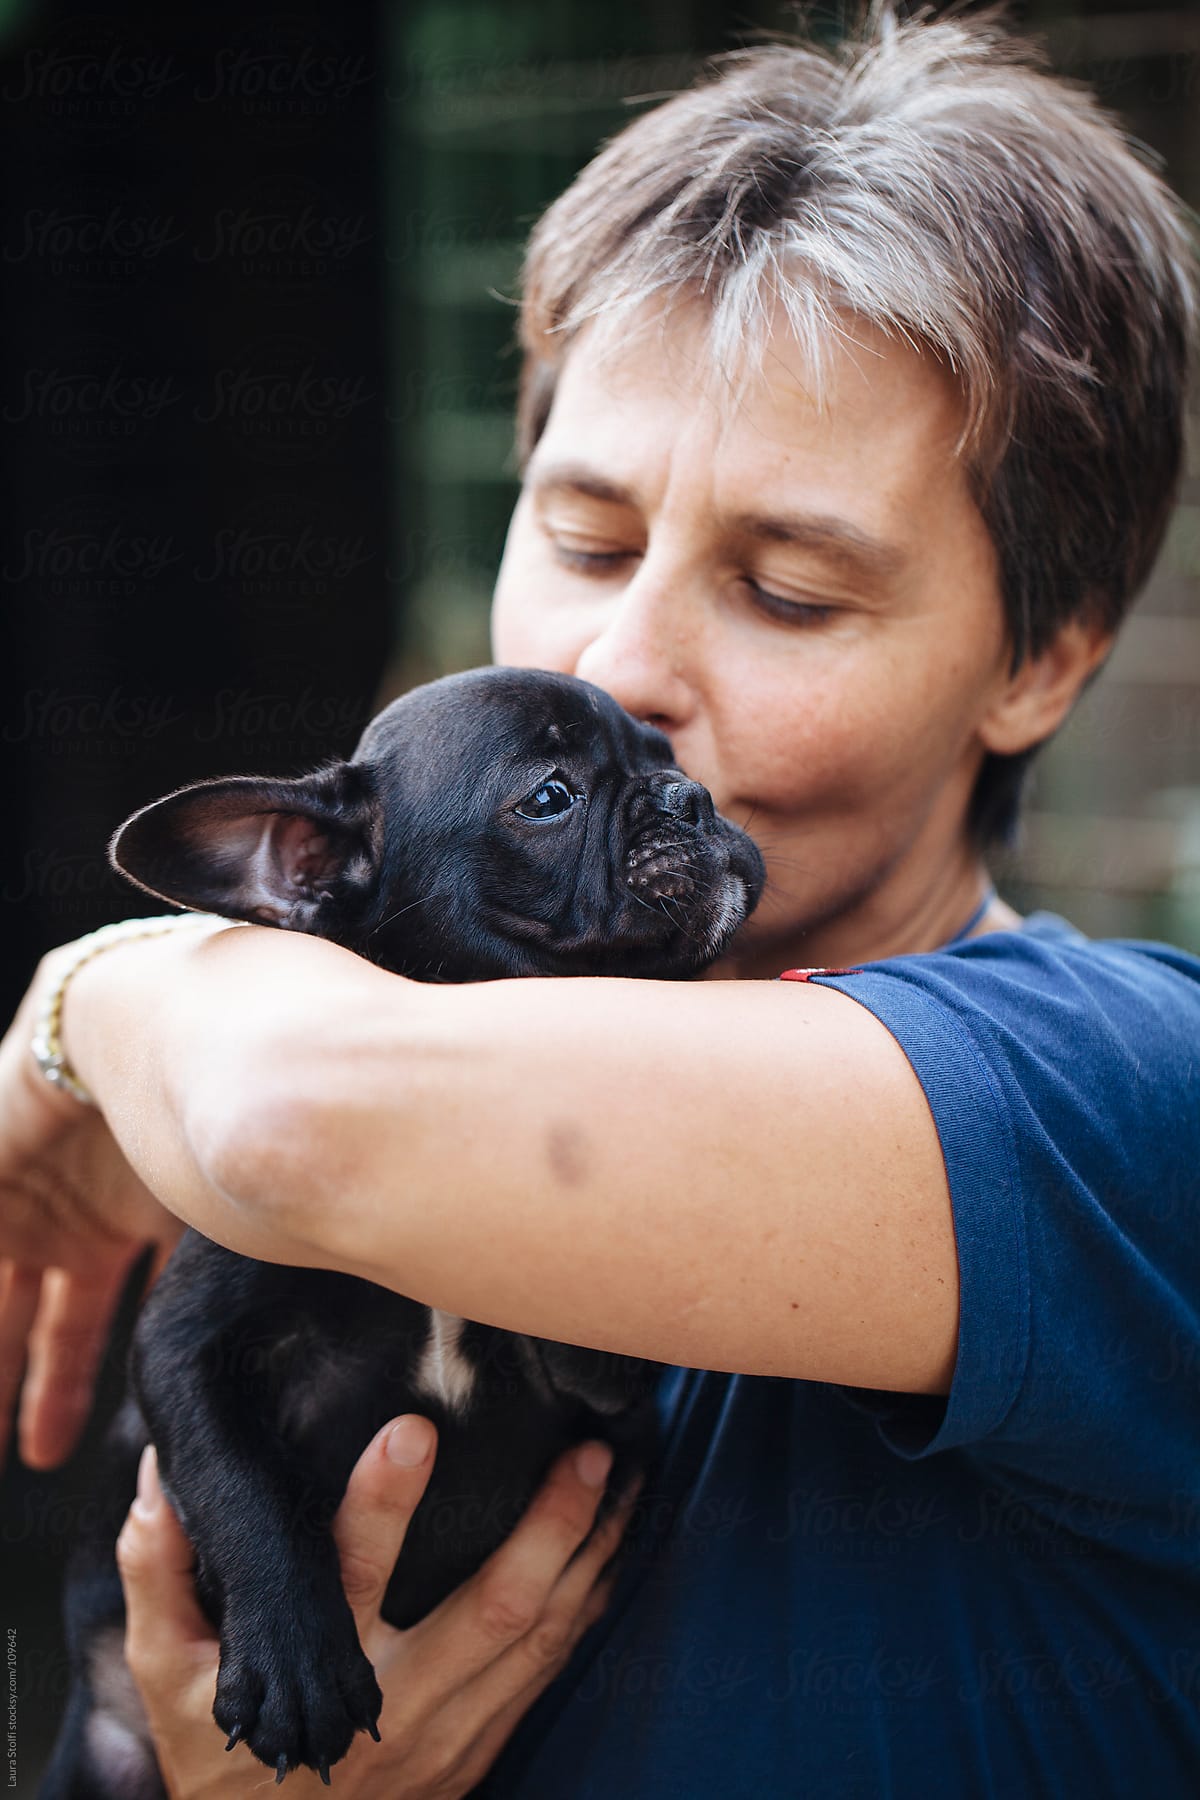 Woman holding in her arms and cuddling a French Bulldog puppy dog